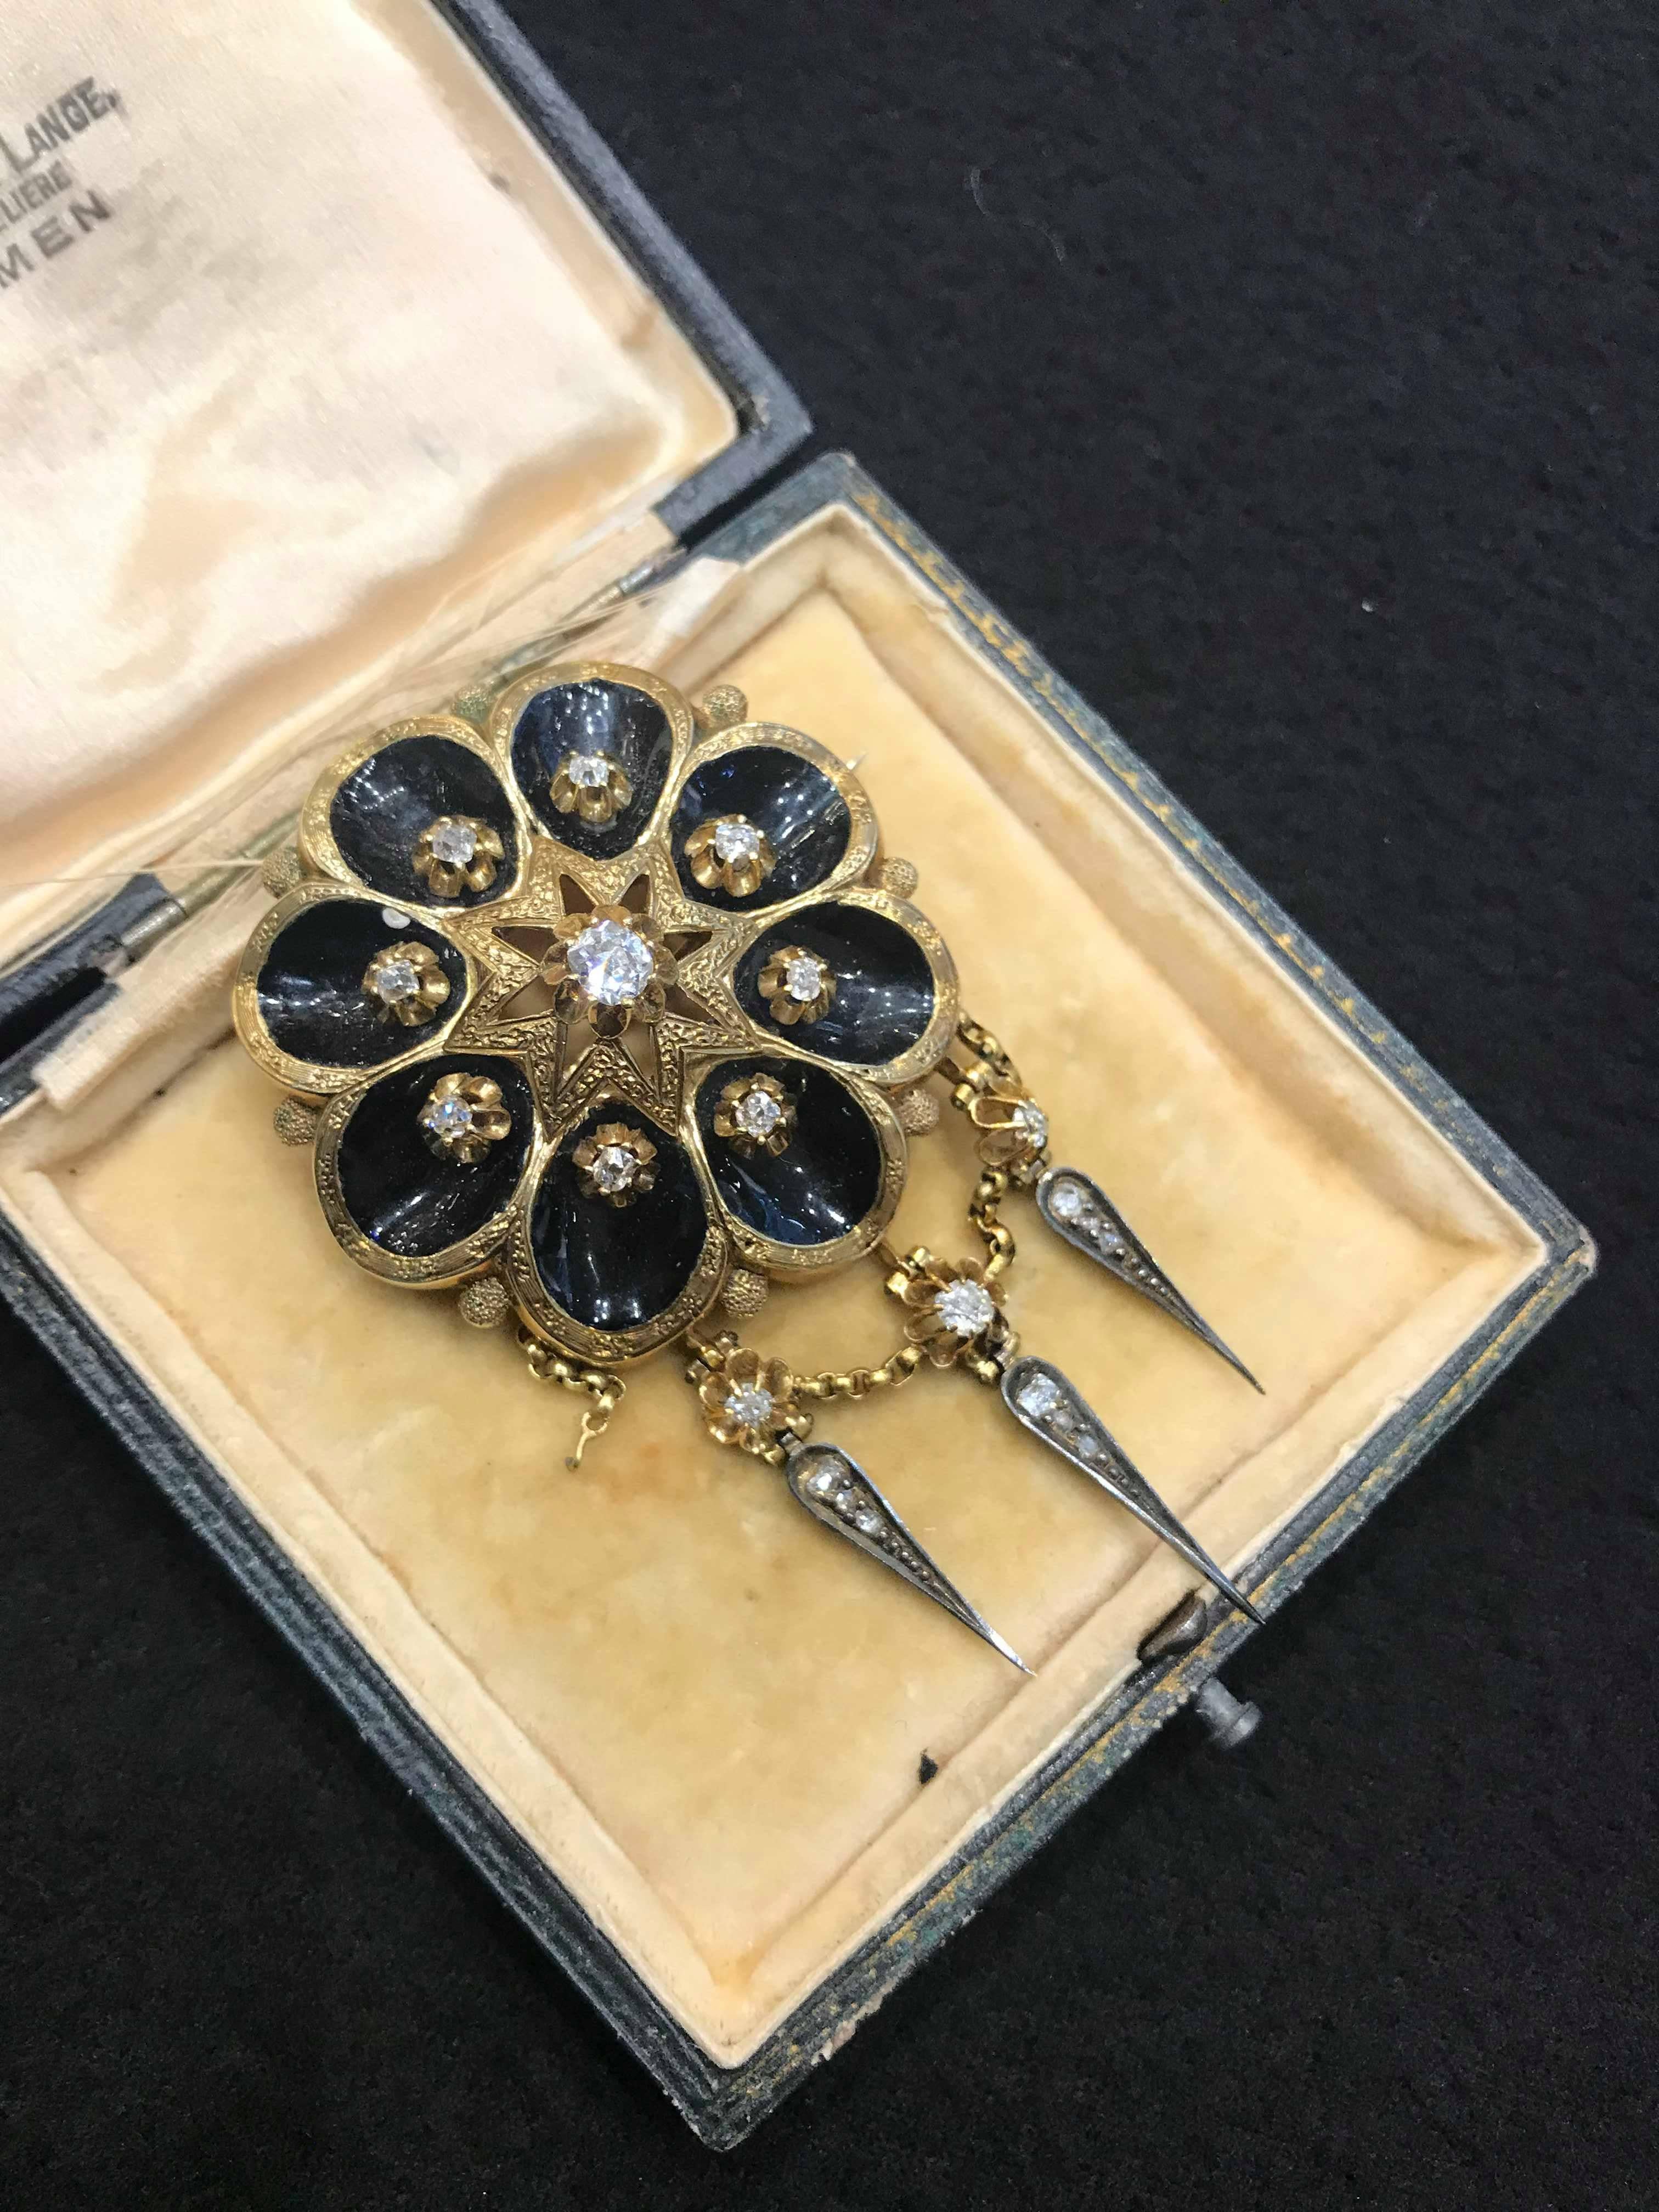 Dating back to the Victorian era of the 1860s and 1870s, this brooch is an elegant example of classic mourning jewellery. Crafted in 14 carat yellow gold with a central diamond of 0.40ct and a further eighteen diamonds equating to 1.02ct.